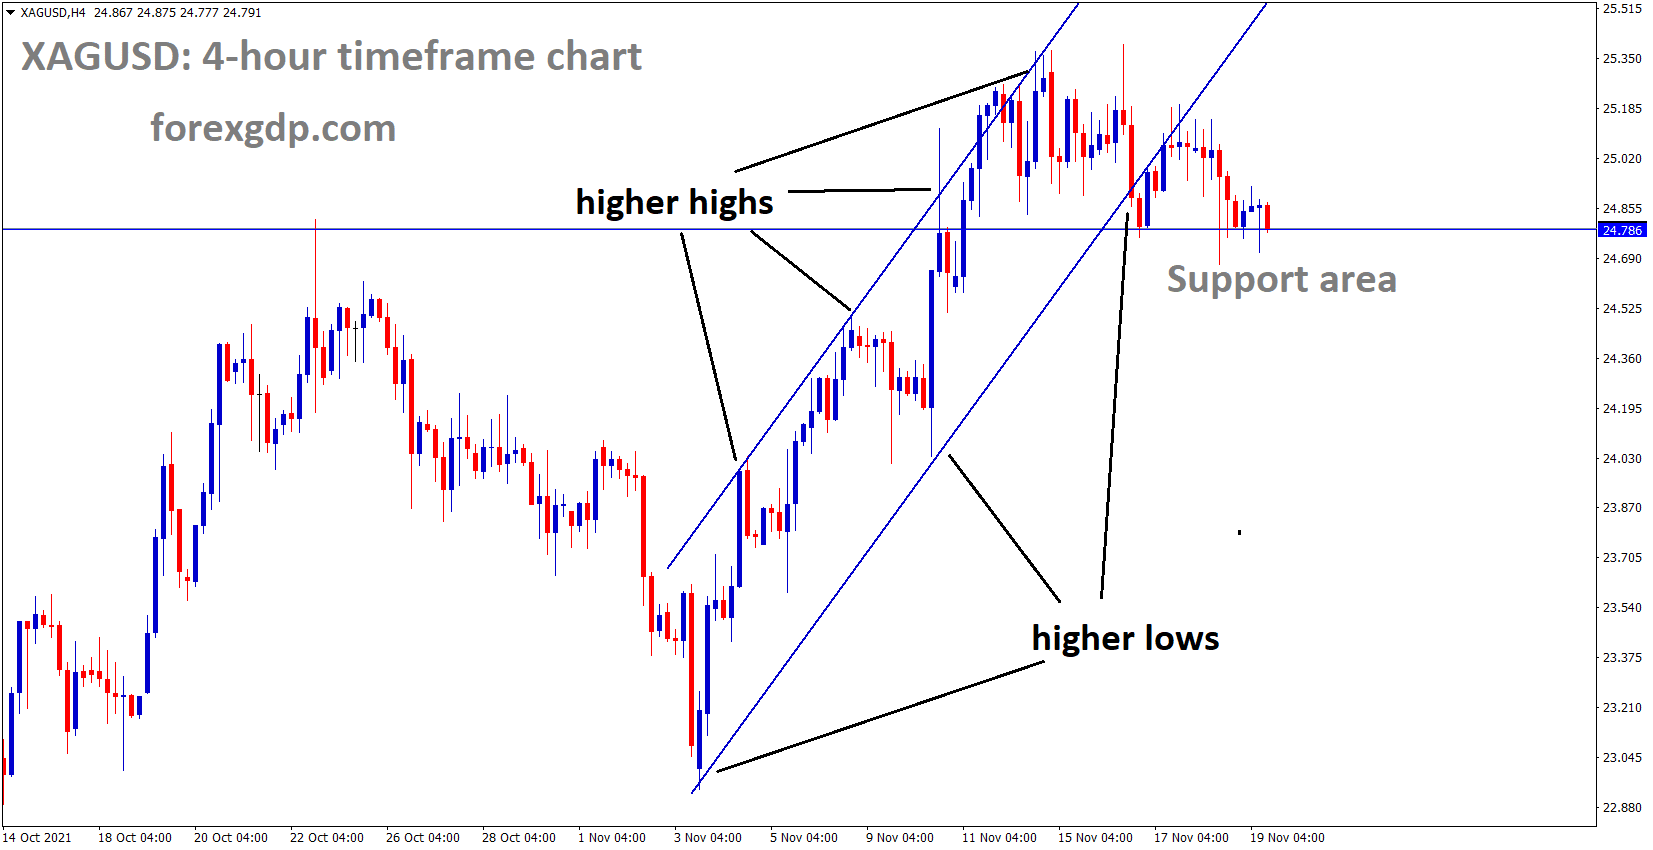 XAGUSD Silver price has broken the ascending channel and the market reached the Horizontal support area.